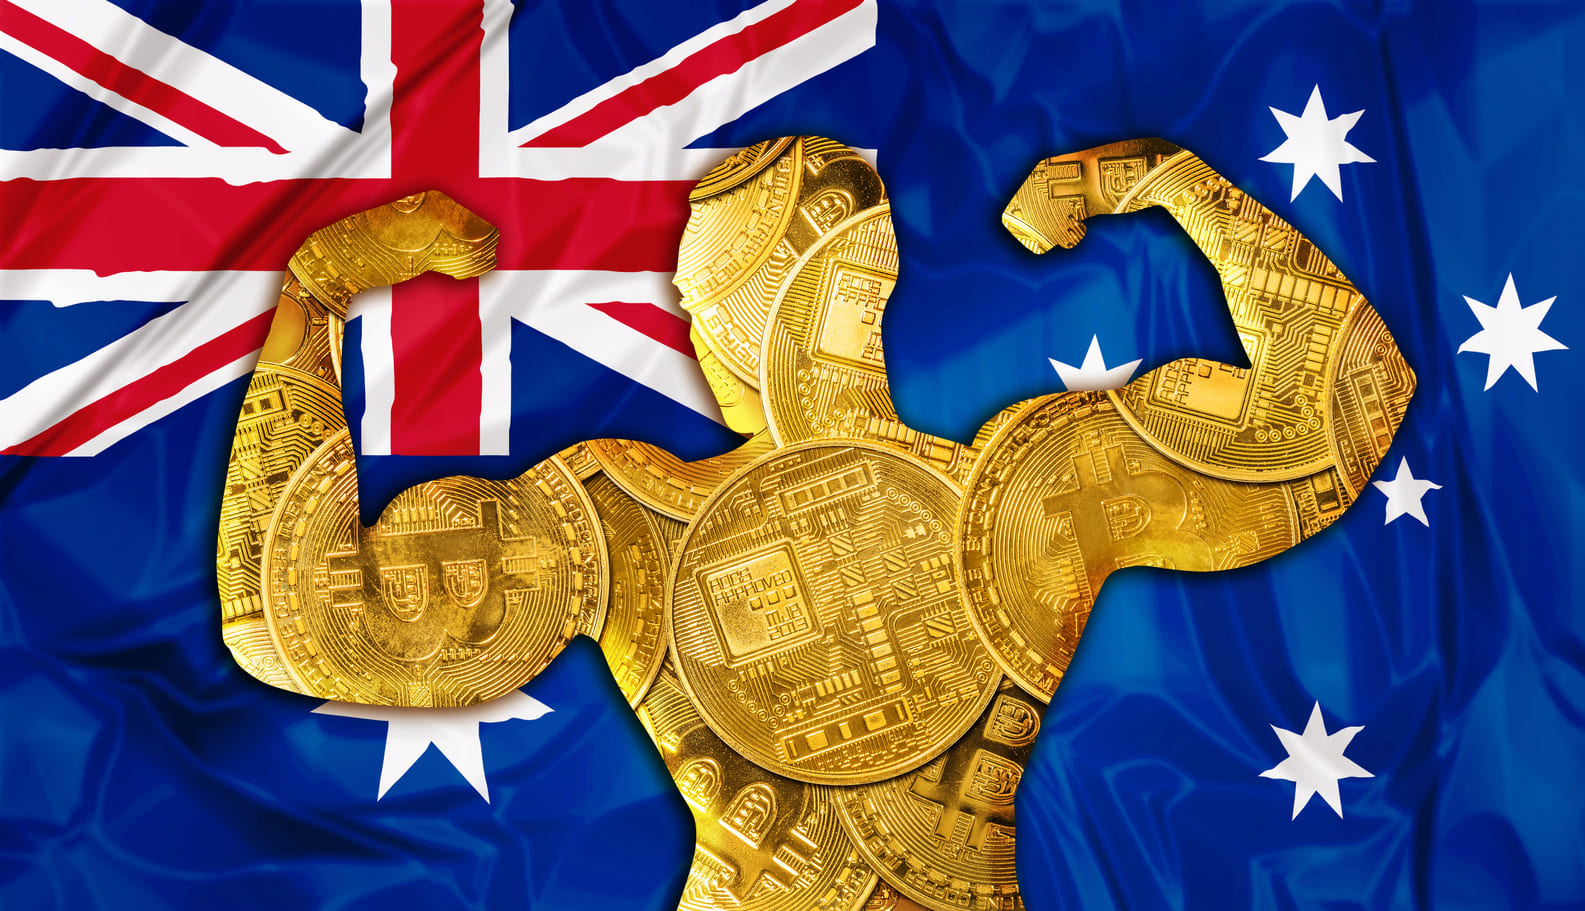 Australia's financial regulator to outline guidelines and roadmap for crypto assets